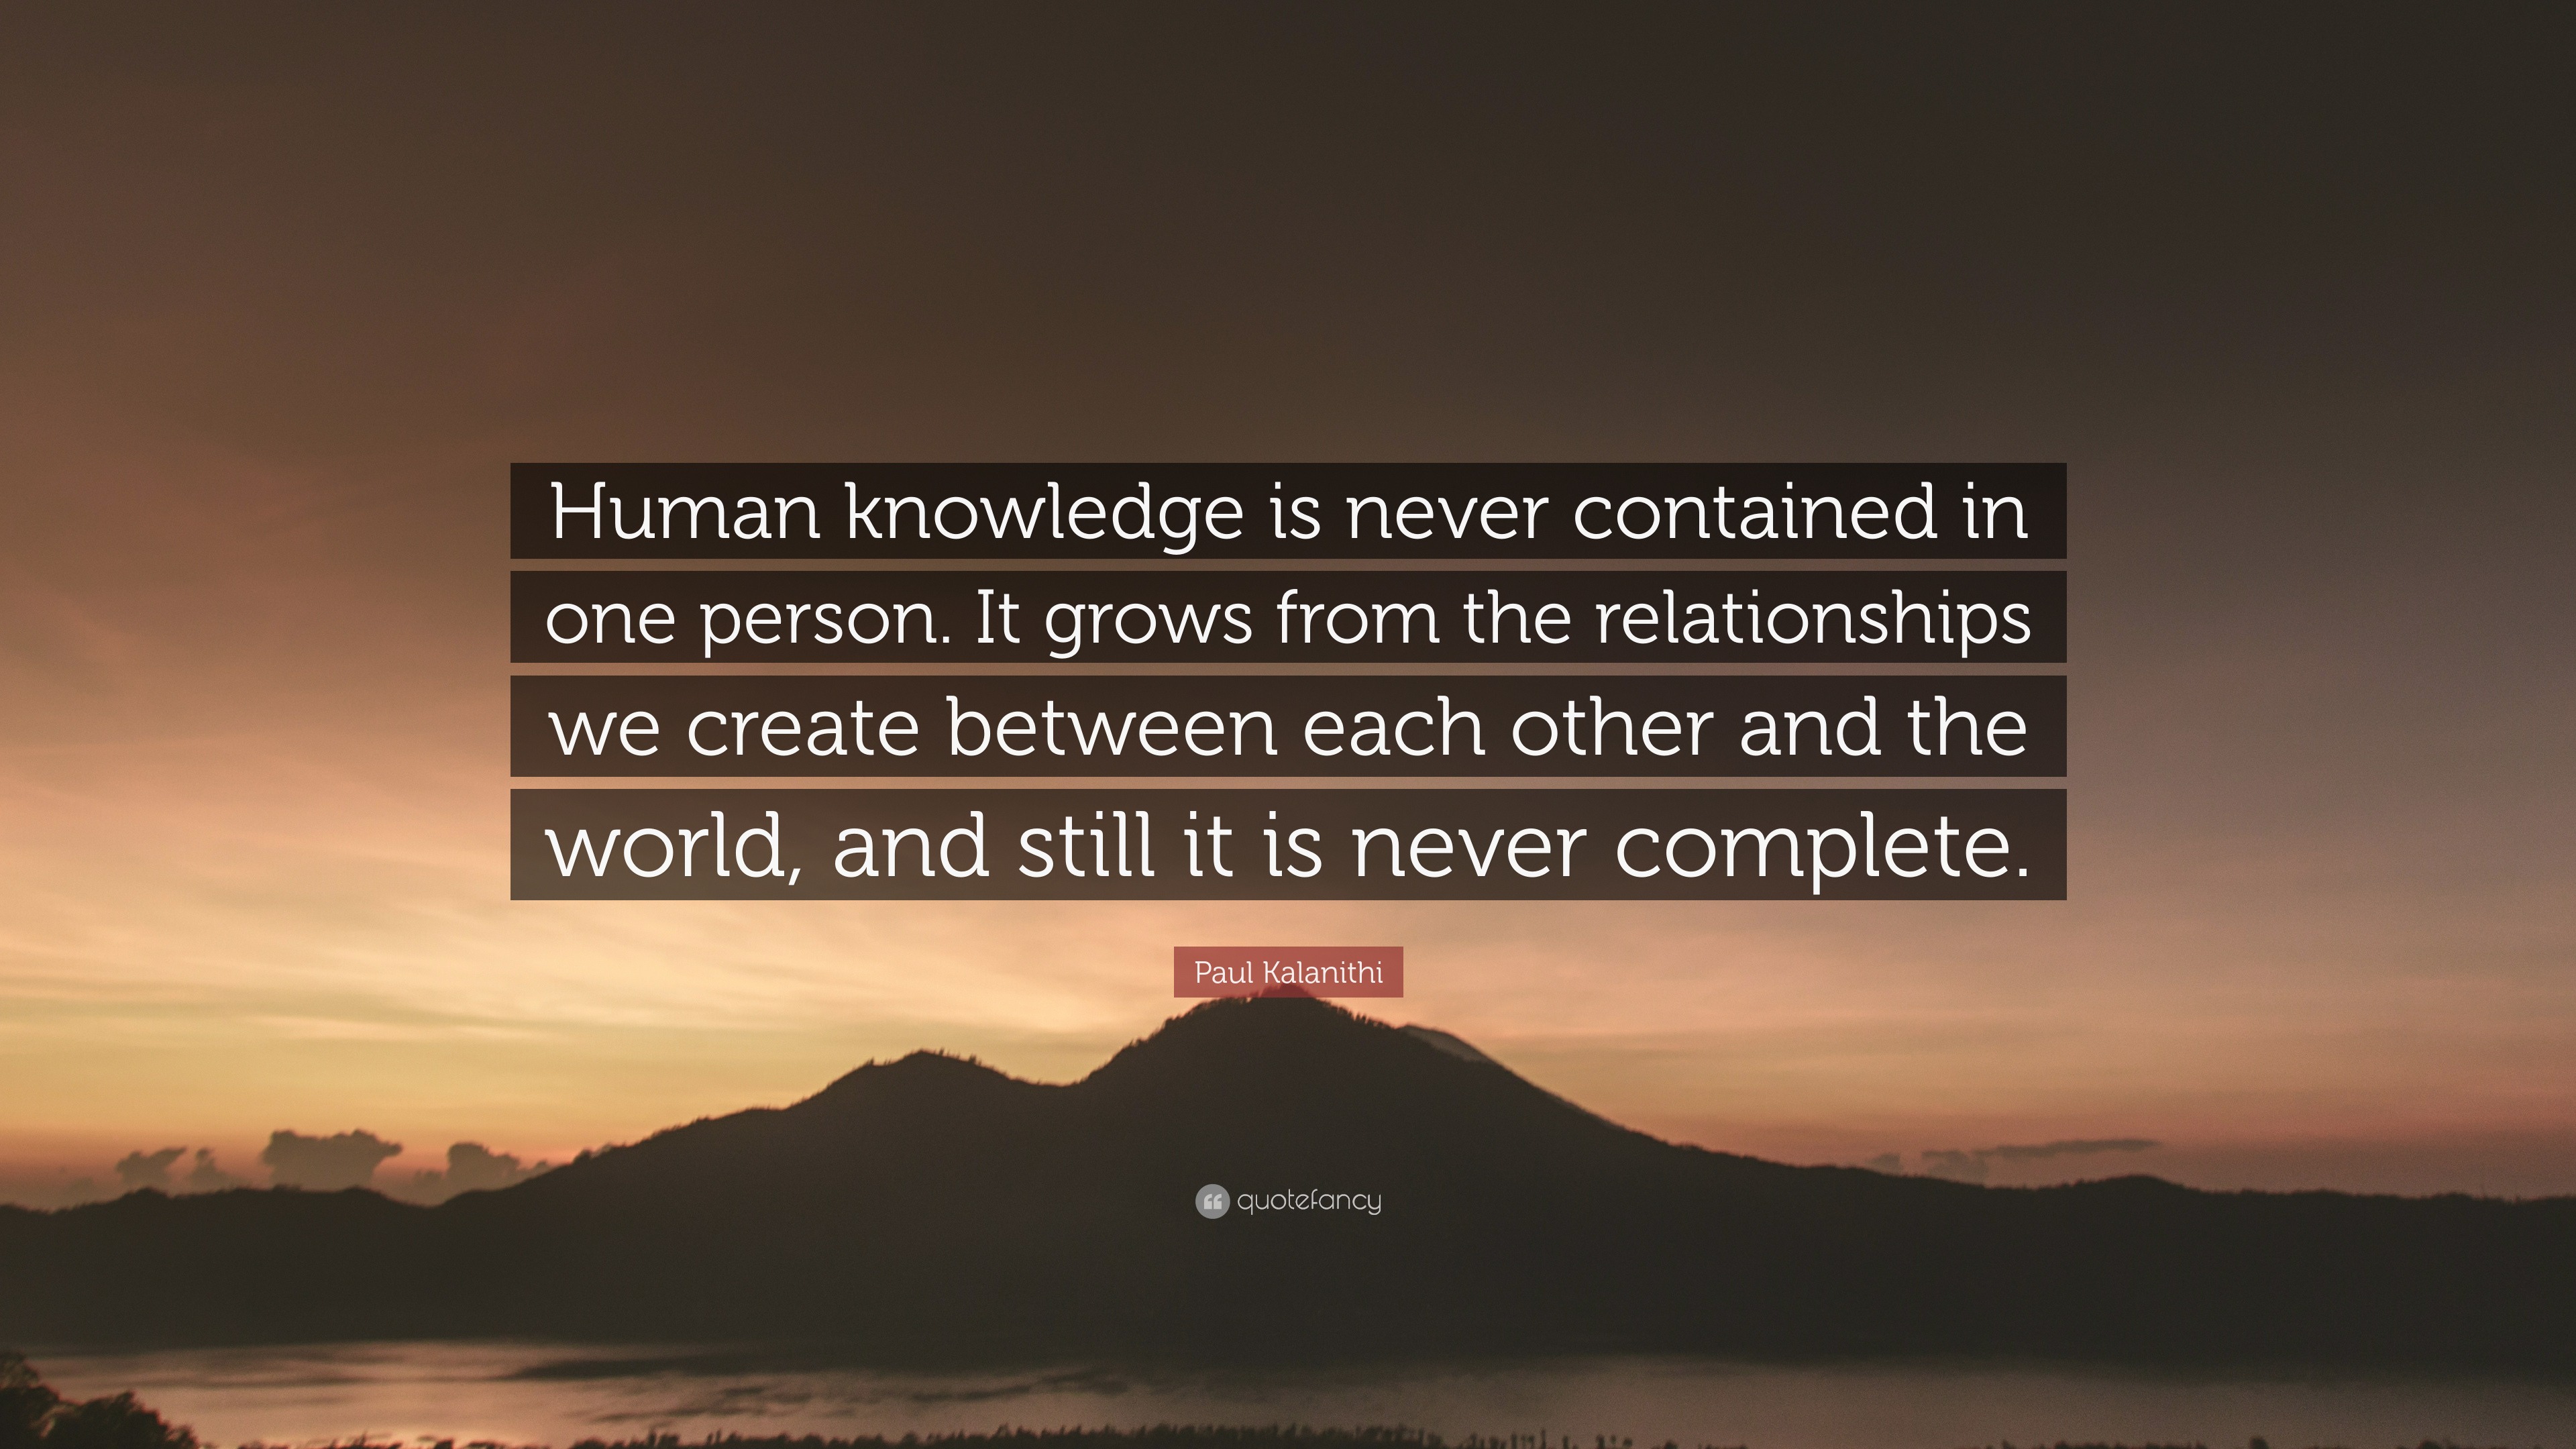 Paul Kalanithi Quote: “Human knowledge is never contained in one person